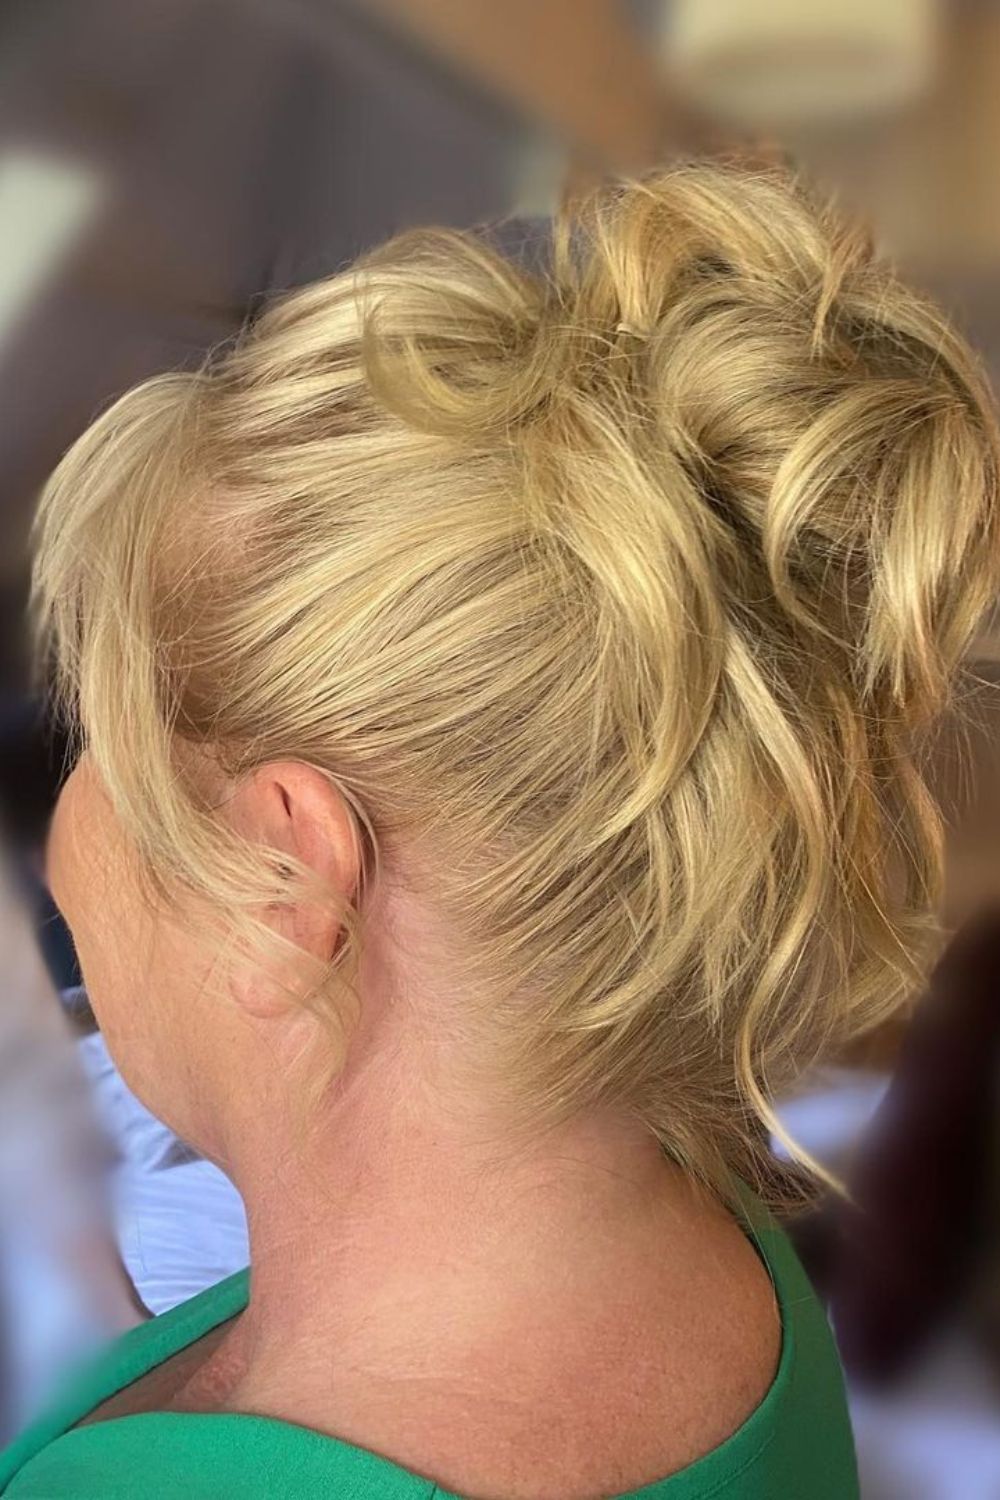 A woman with a blonde messy high bun.